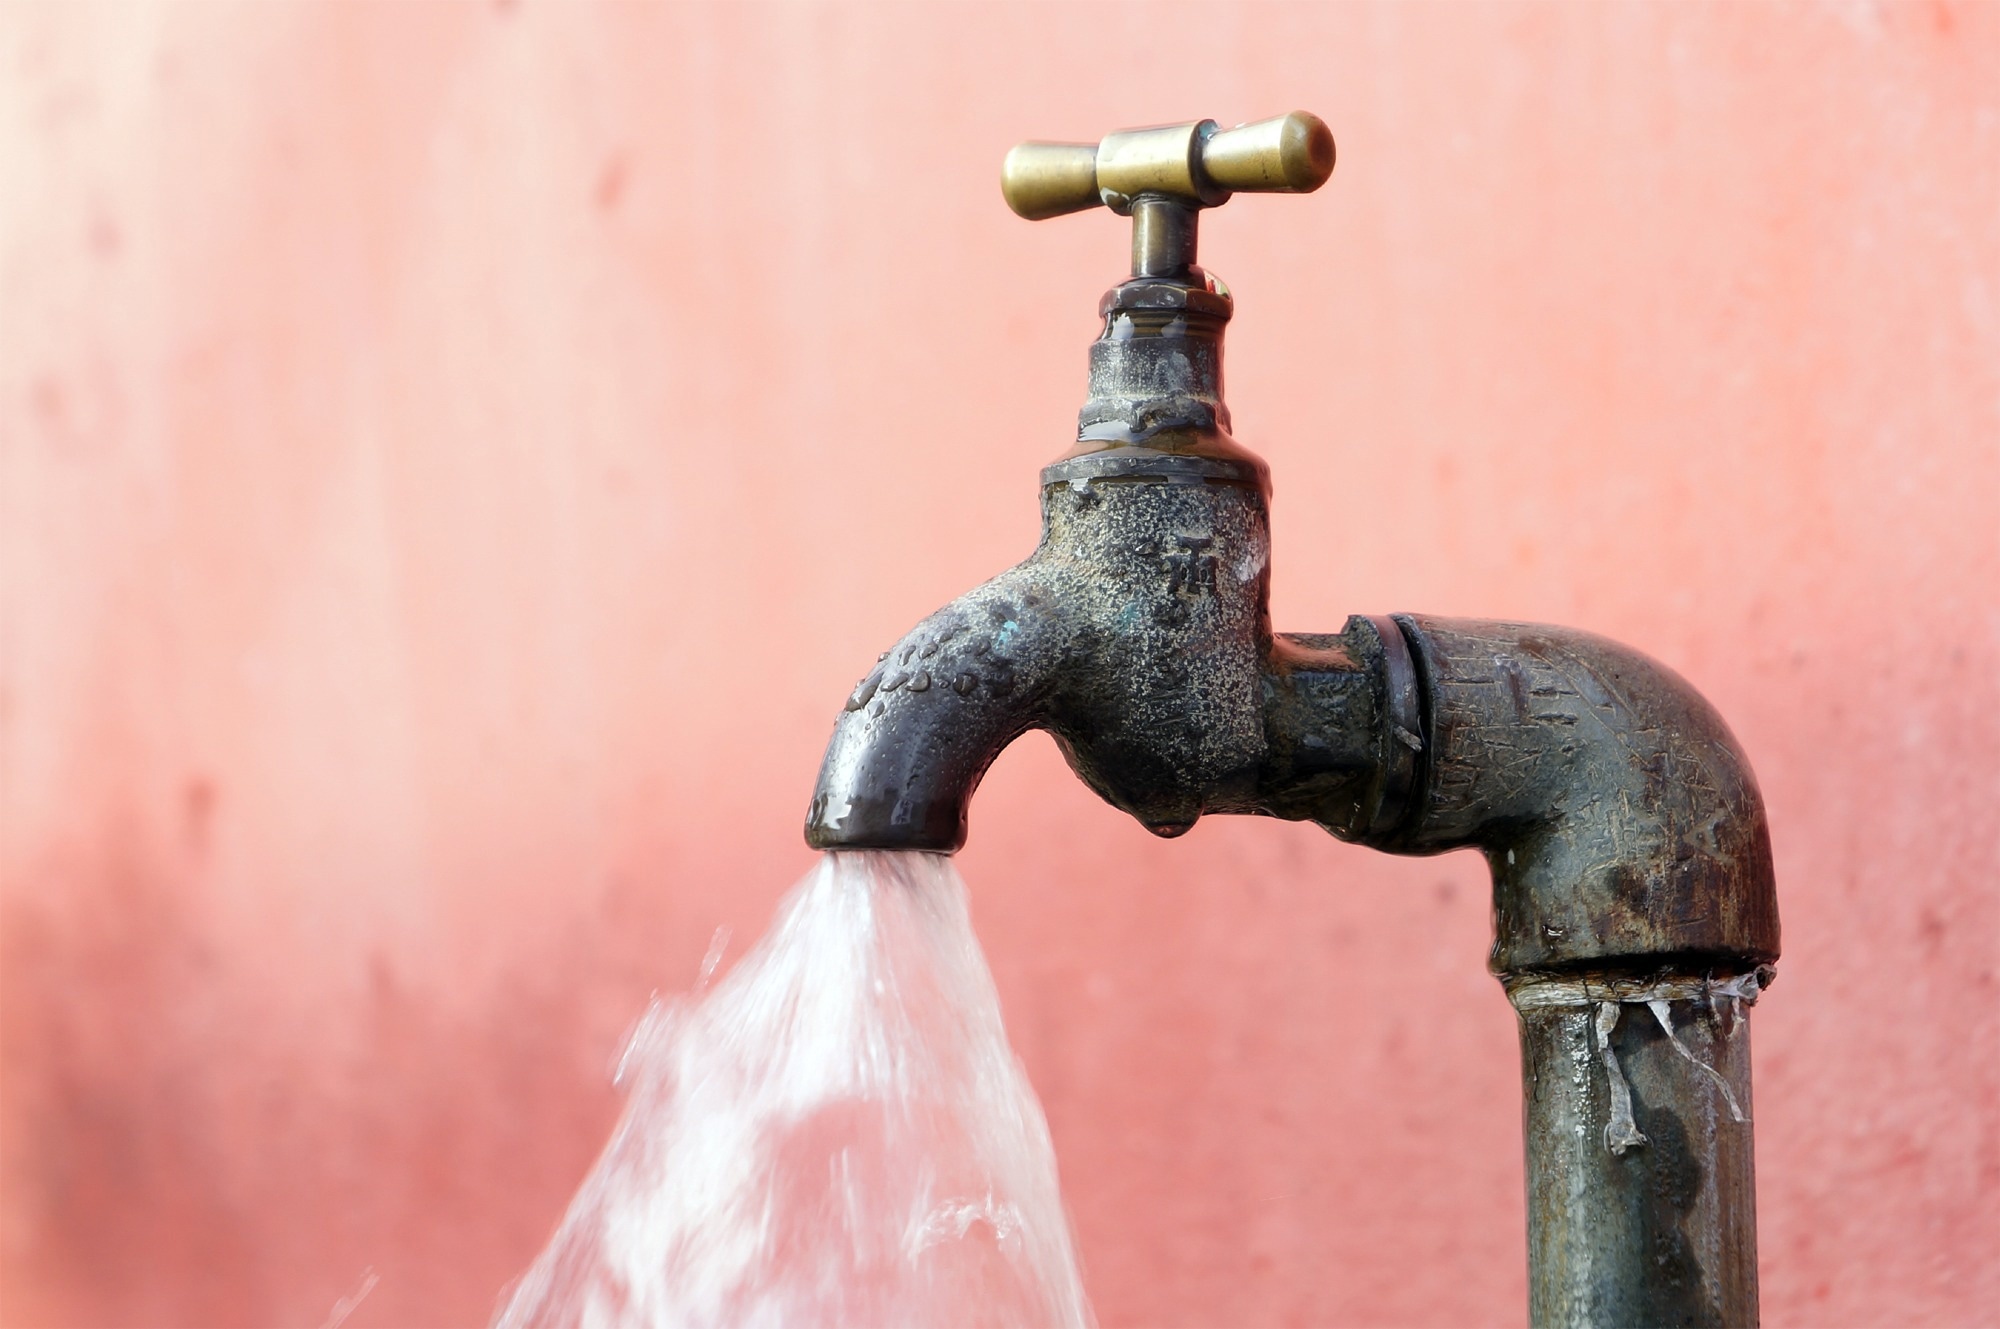 Study: Estimated childhood lead exposure from drinking water in Chicago. Image Credit: bakhistudio / Shutterstock.com